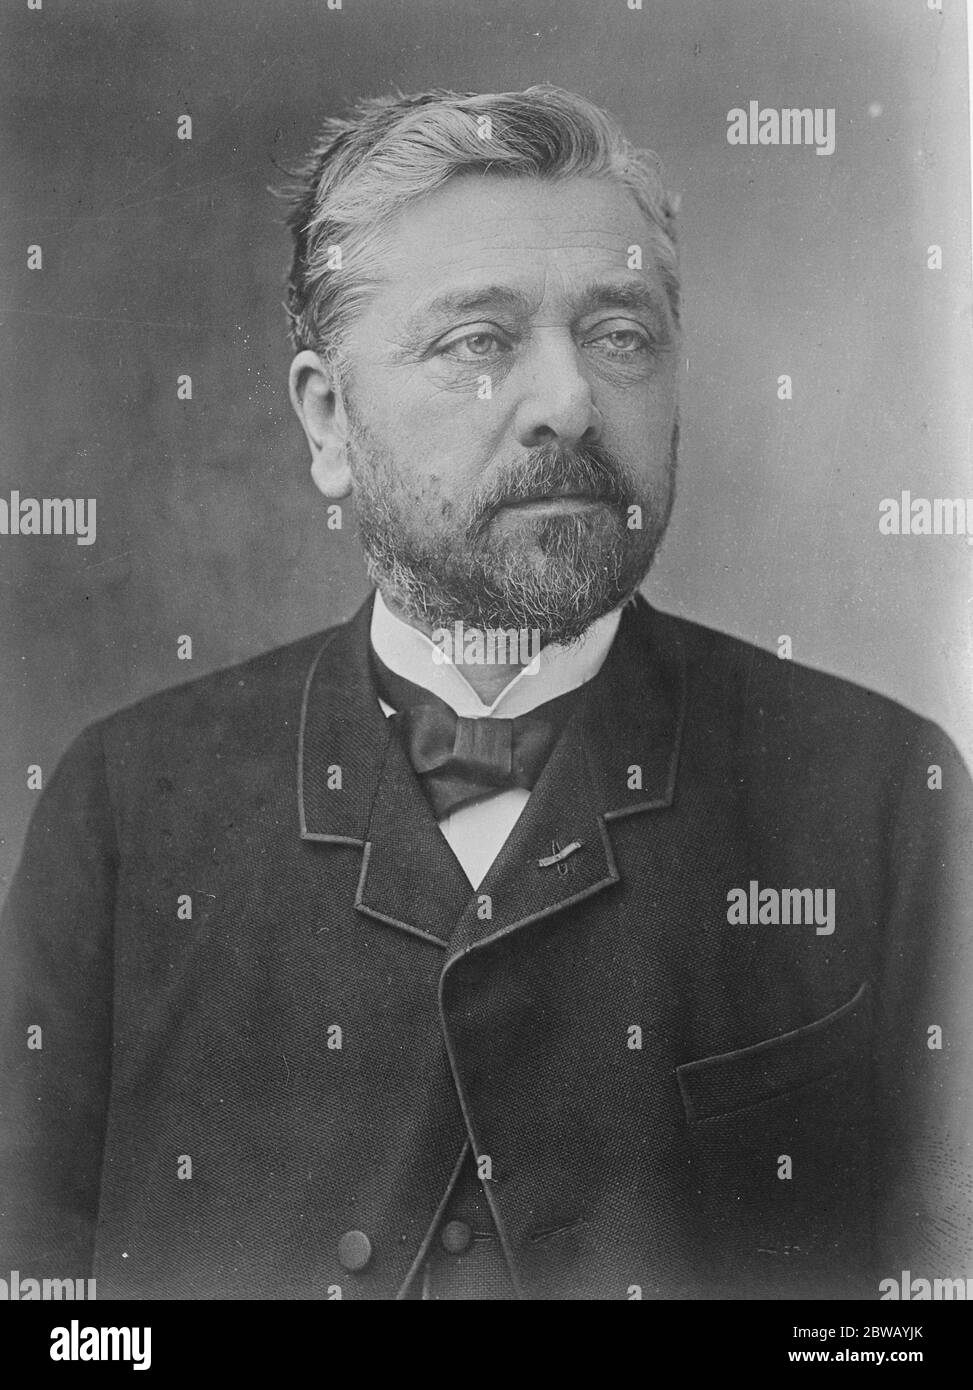 France 's most famous engineer ill . Alexandre Gustave Eiffel , builder of the Eiffel Tower and of the framework for the colossal Statue of Liberty in New York Harbour , who is suffering from influenza . He celebrated his 90th birthday on December 15th but has never been photographed since this hitherto unpublished portrait was taken . 9 January 1923 Stock Photo